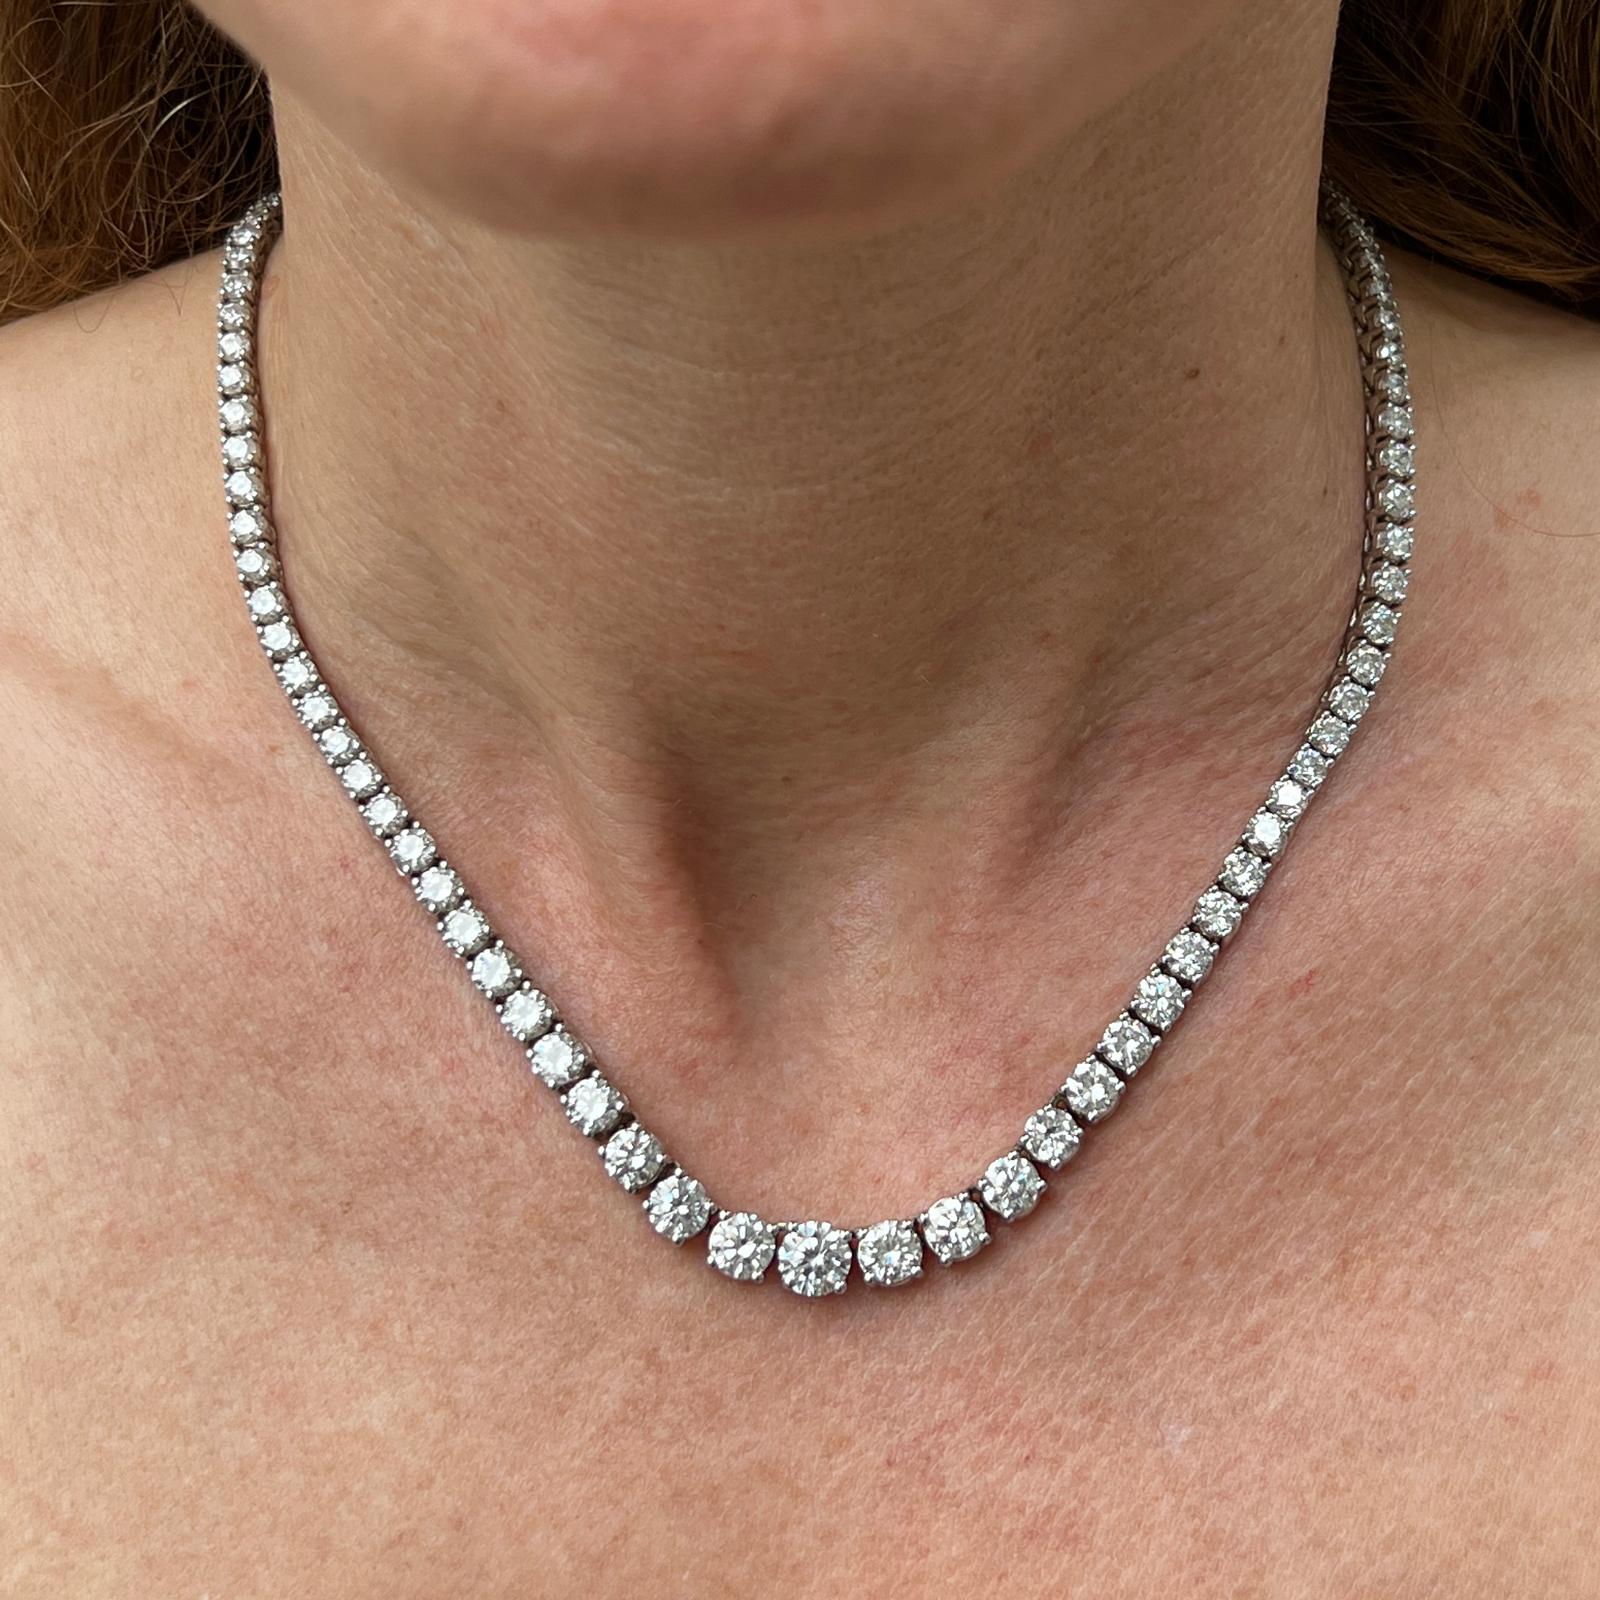 Gorgeous diamond riviera necklace crafted in 14 karat white gold. The necklace features 132 round brilliant cut diamonds weighing 19.04 carat total weight. The diamonds are graduated with the largest diamond weighing approximately .95 carats. The